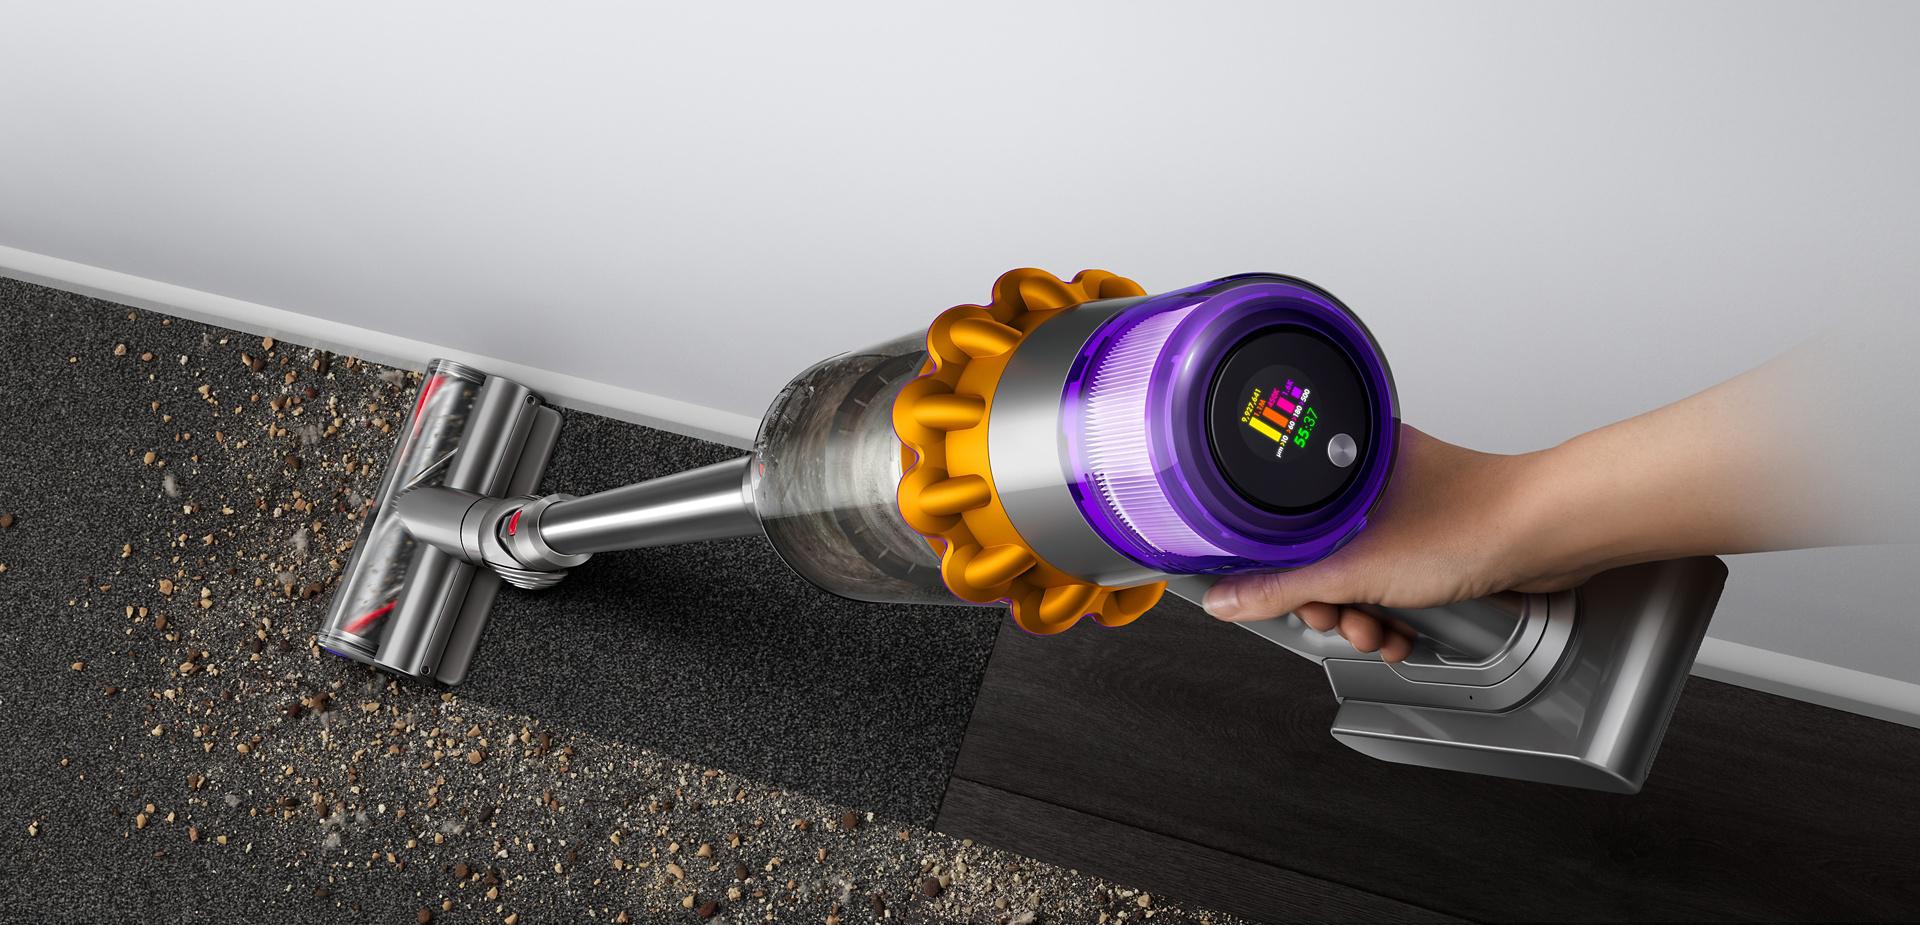 Dyson V15 Detect vacuum cleaning debris from a hard floor next to a wall